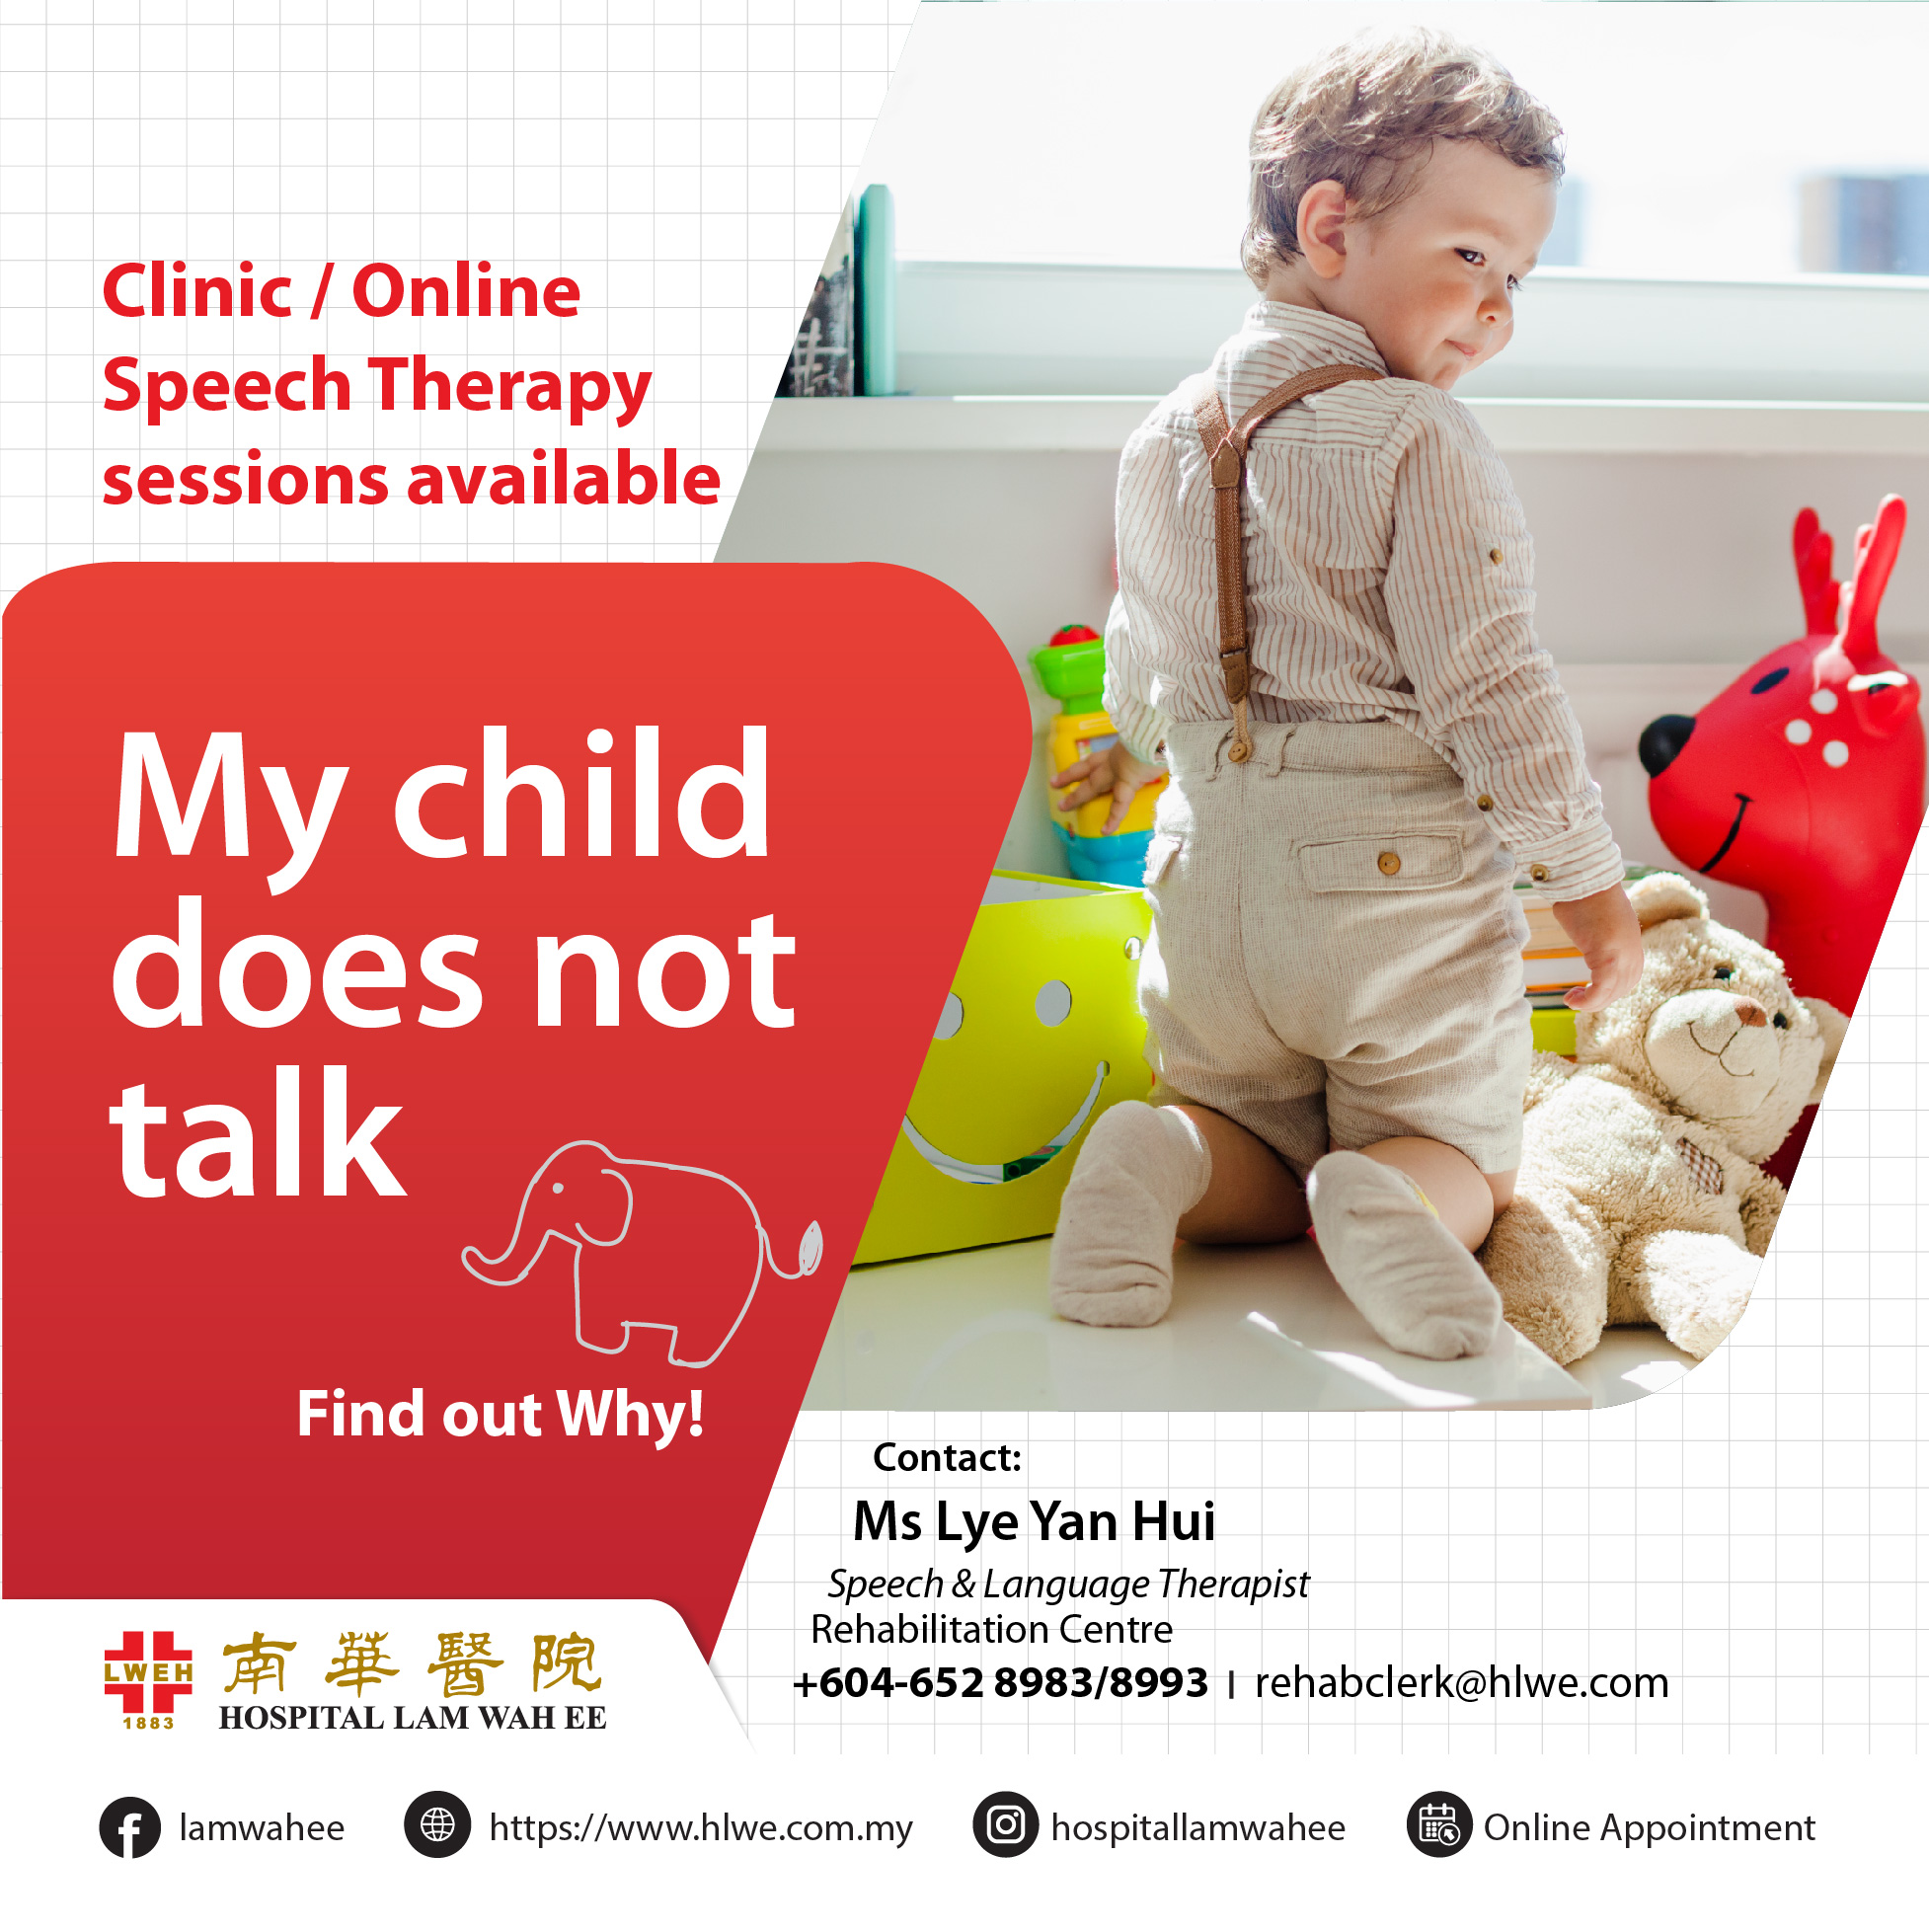 My child does not talk